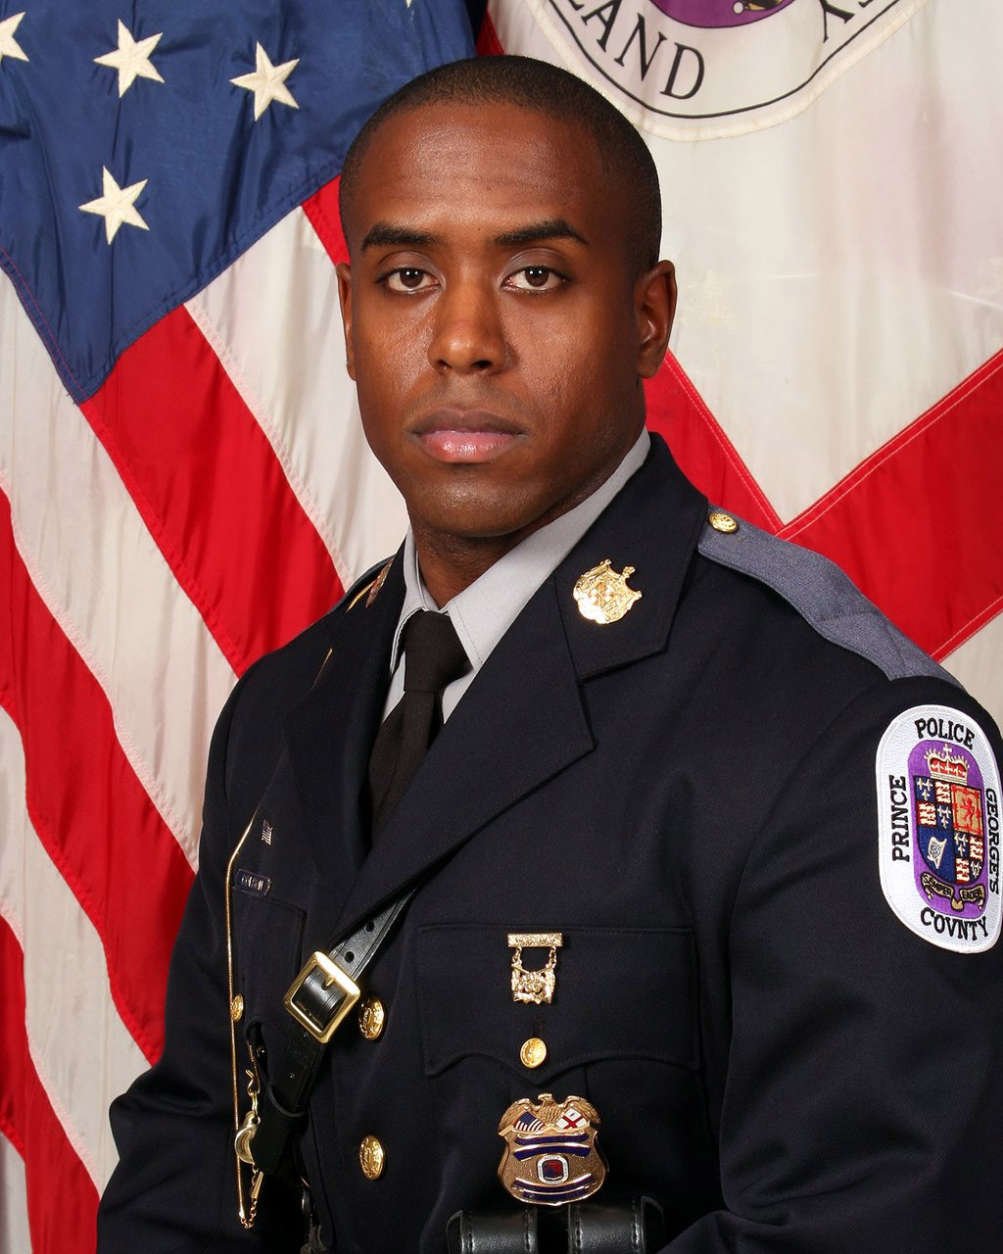 Officer Jacai Colson was shot and killed by friendly fire during a March ambush outside a police station in Landover. (Courtesy Prince George's County Police Department)